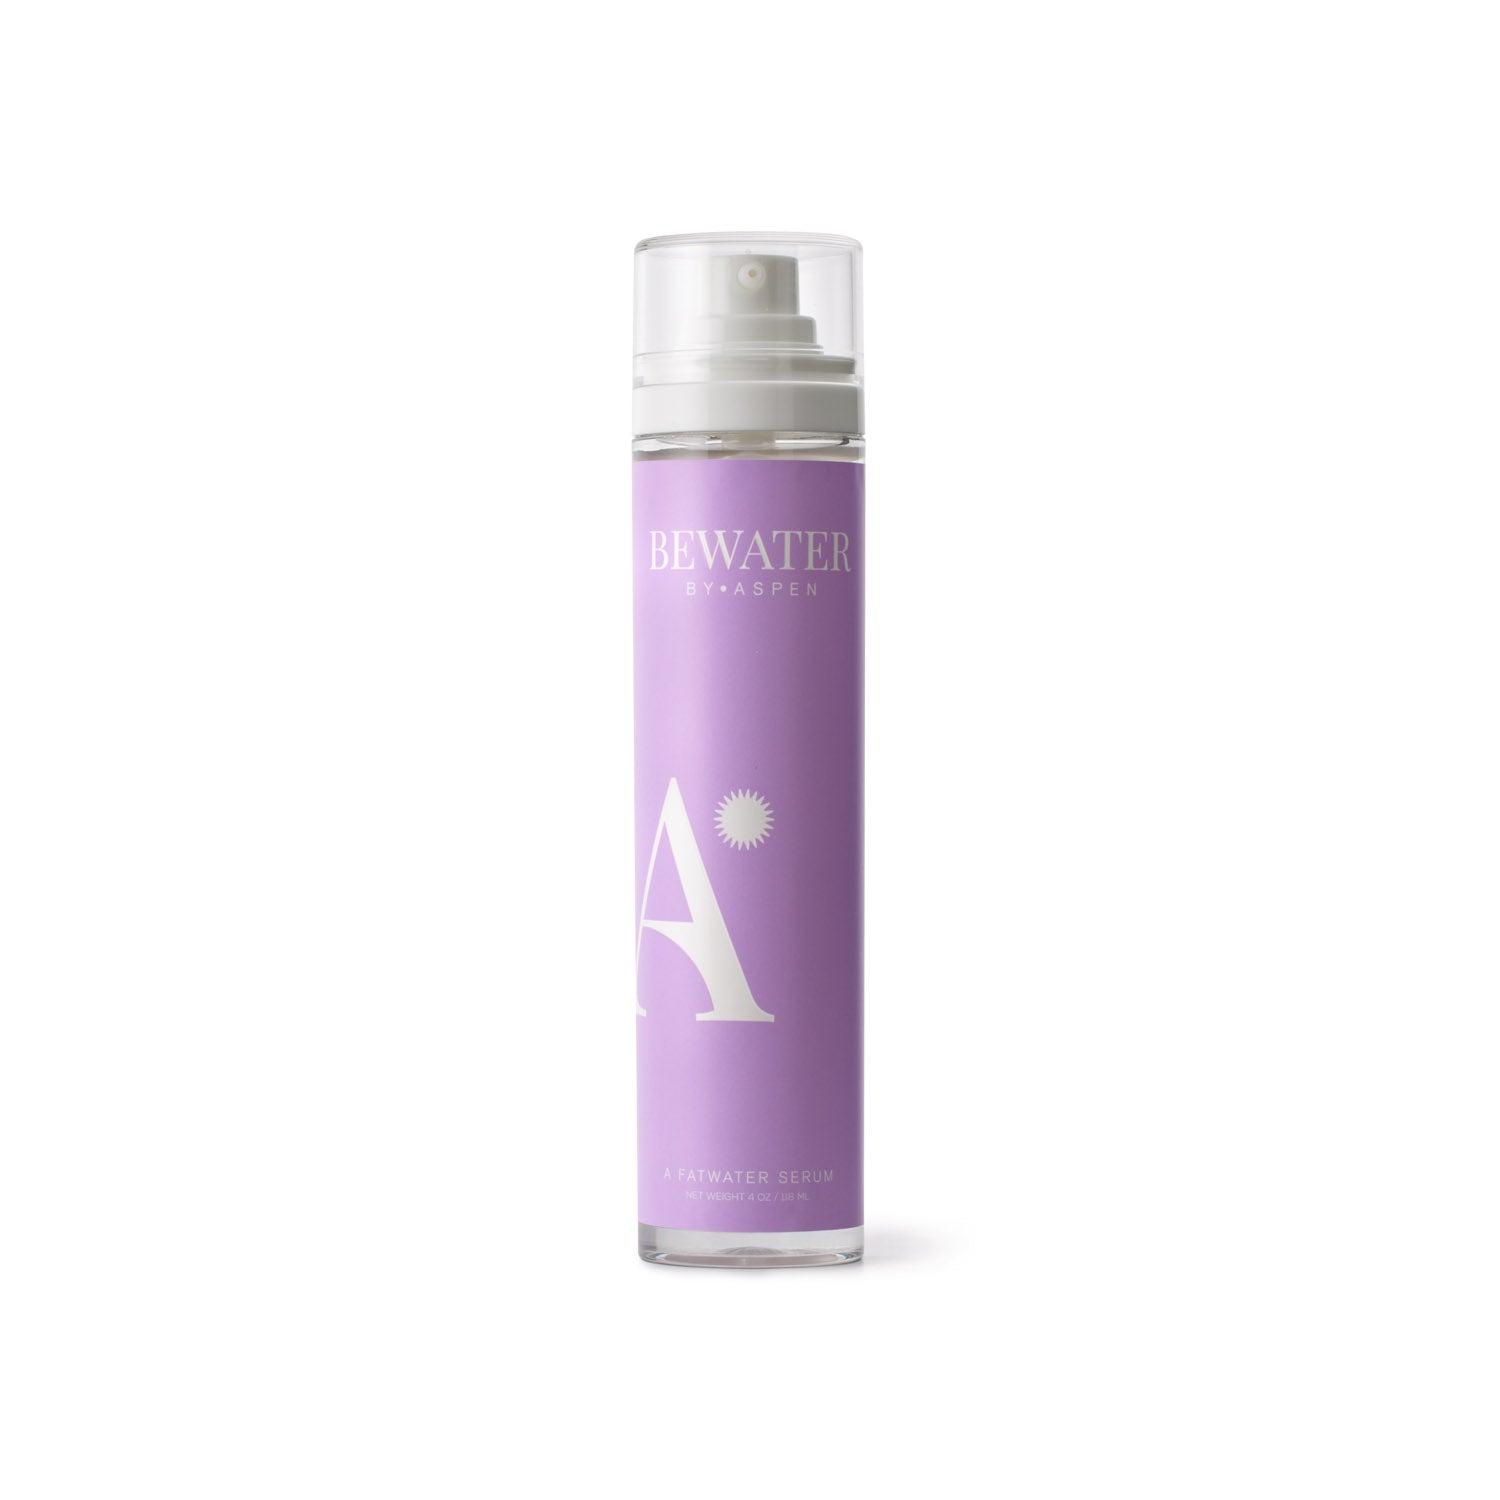 BeWater by Aspen: A Fatwater Serum